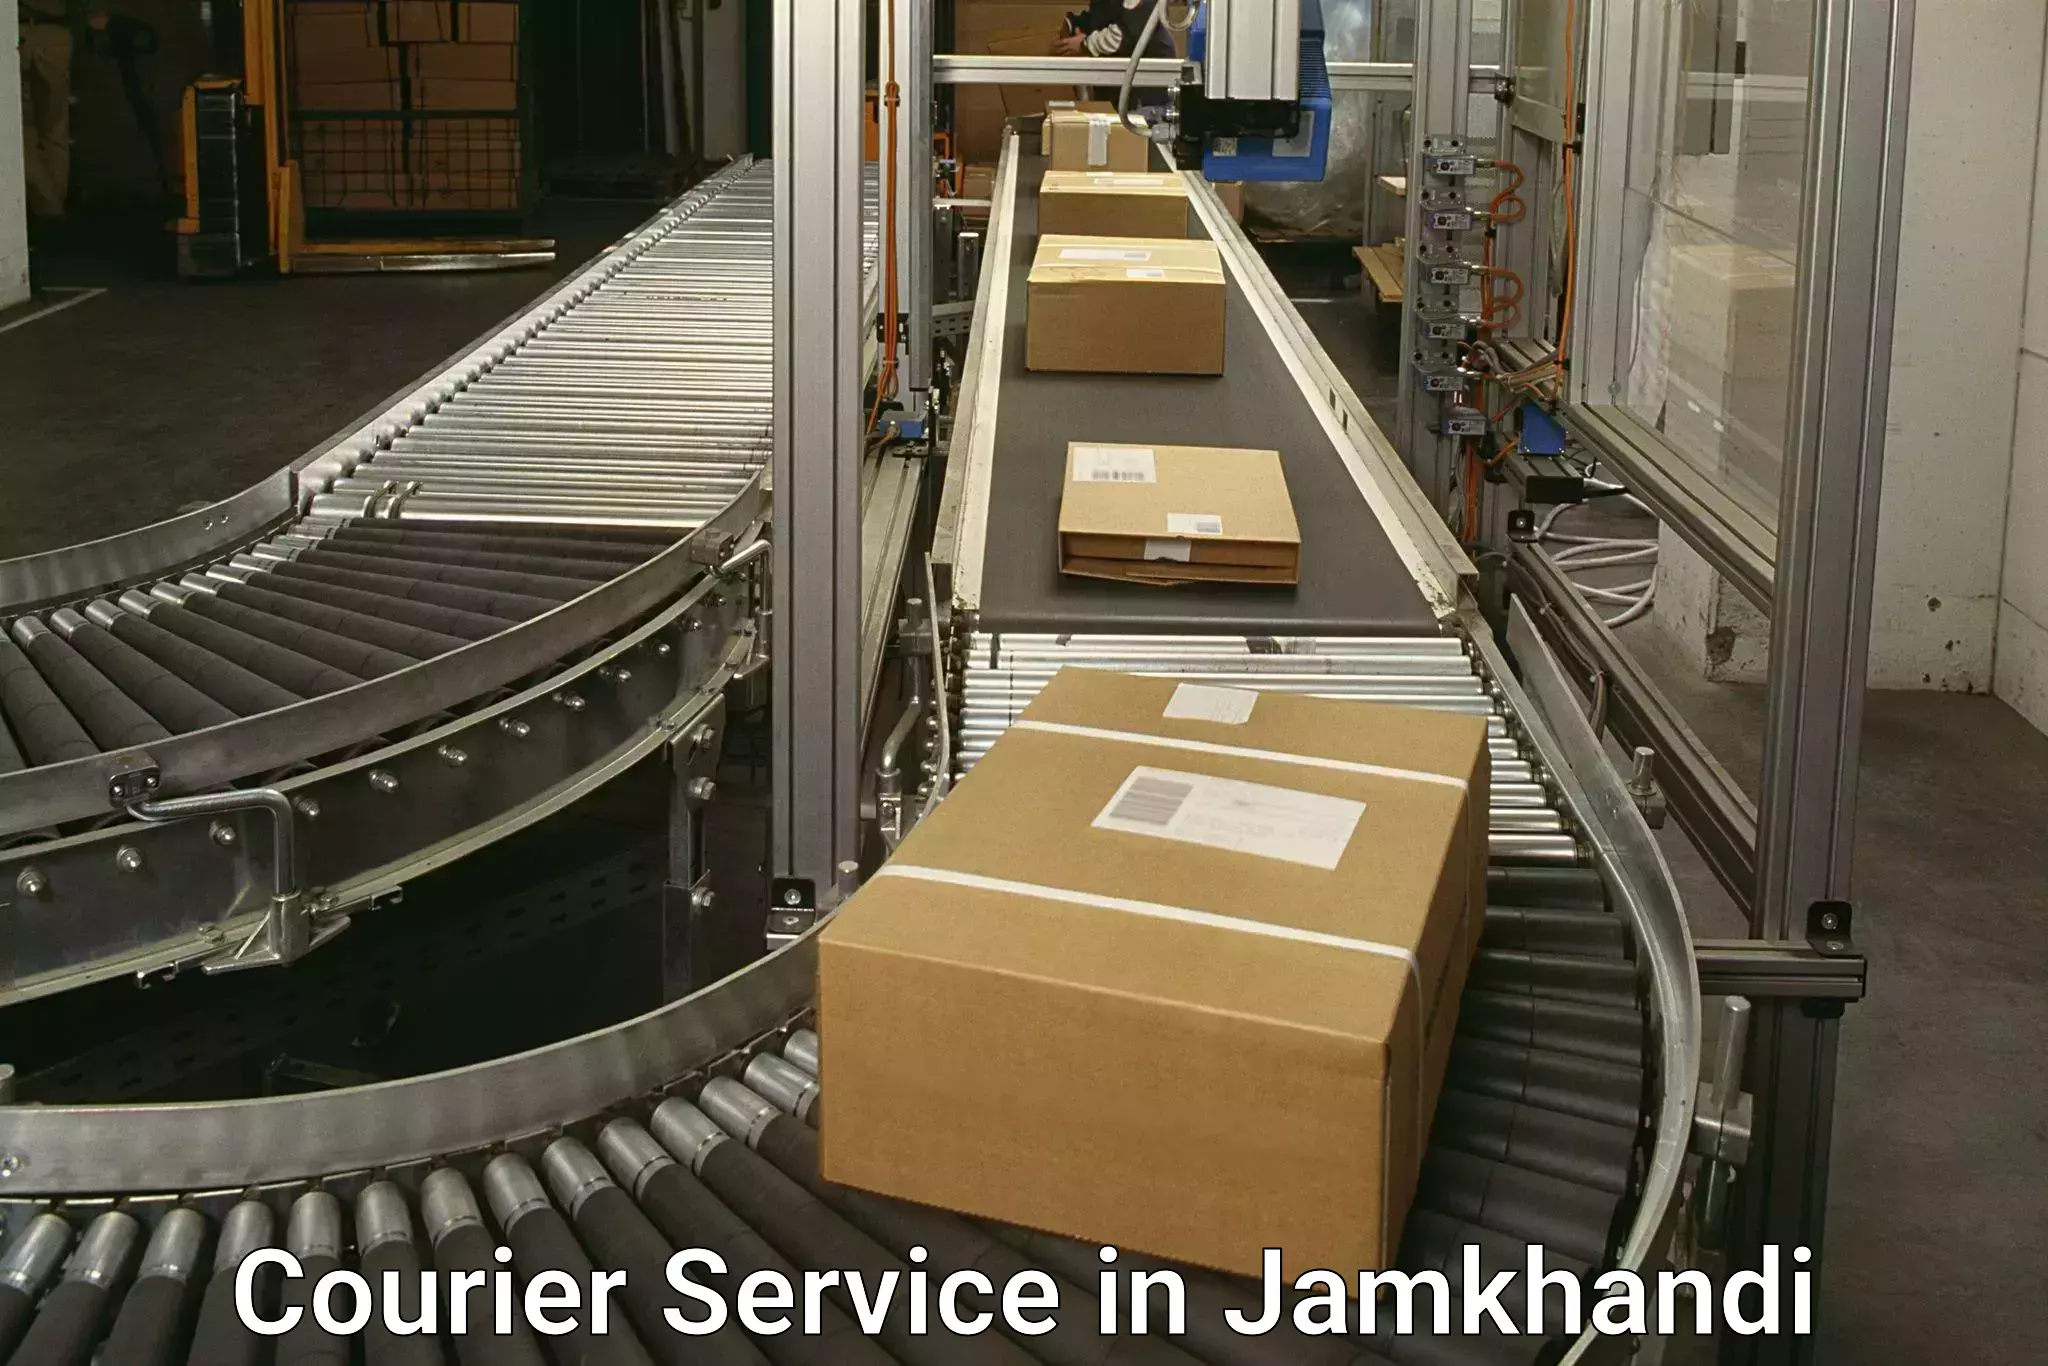 End-to-end delivery in Jamkhandi